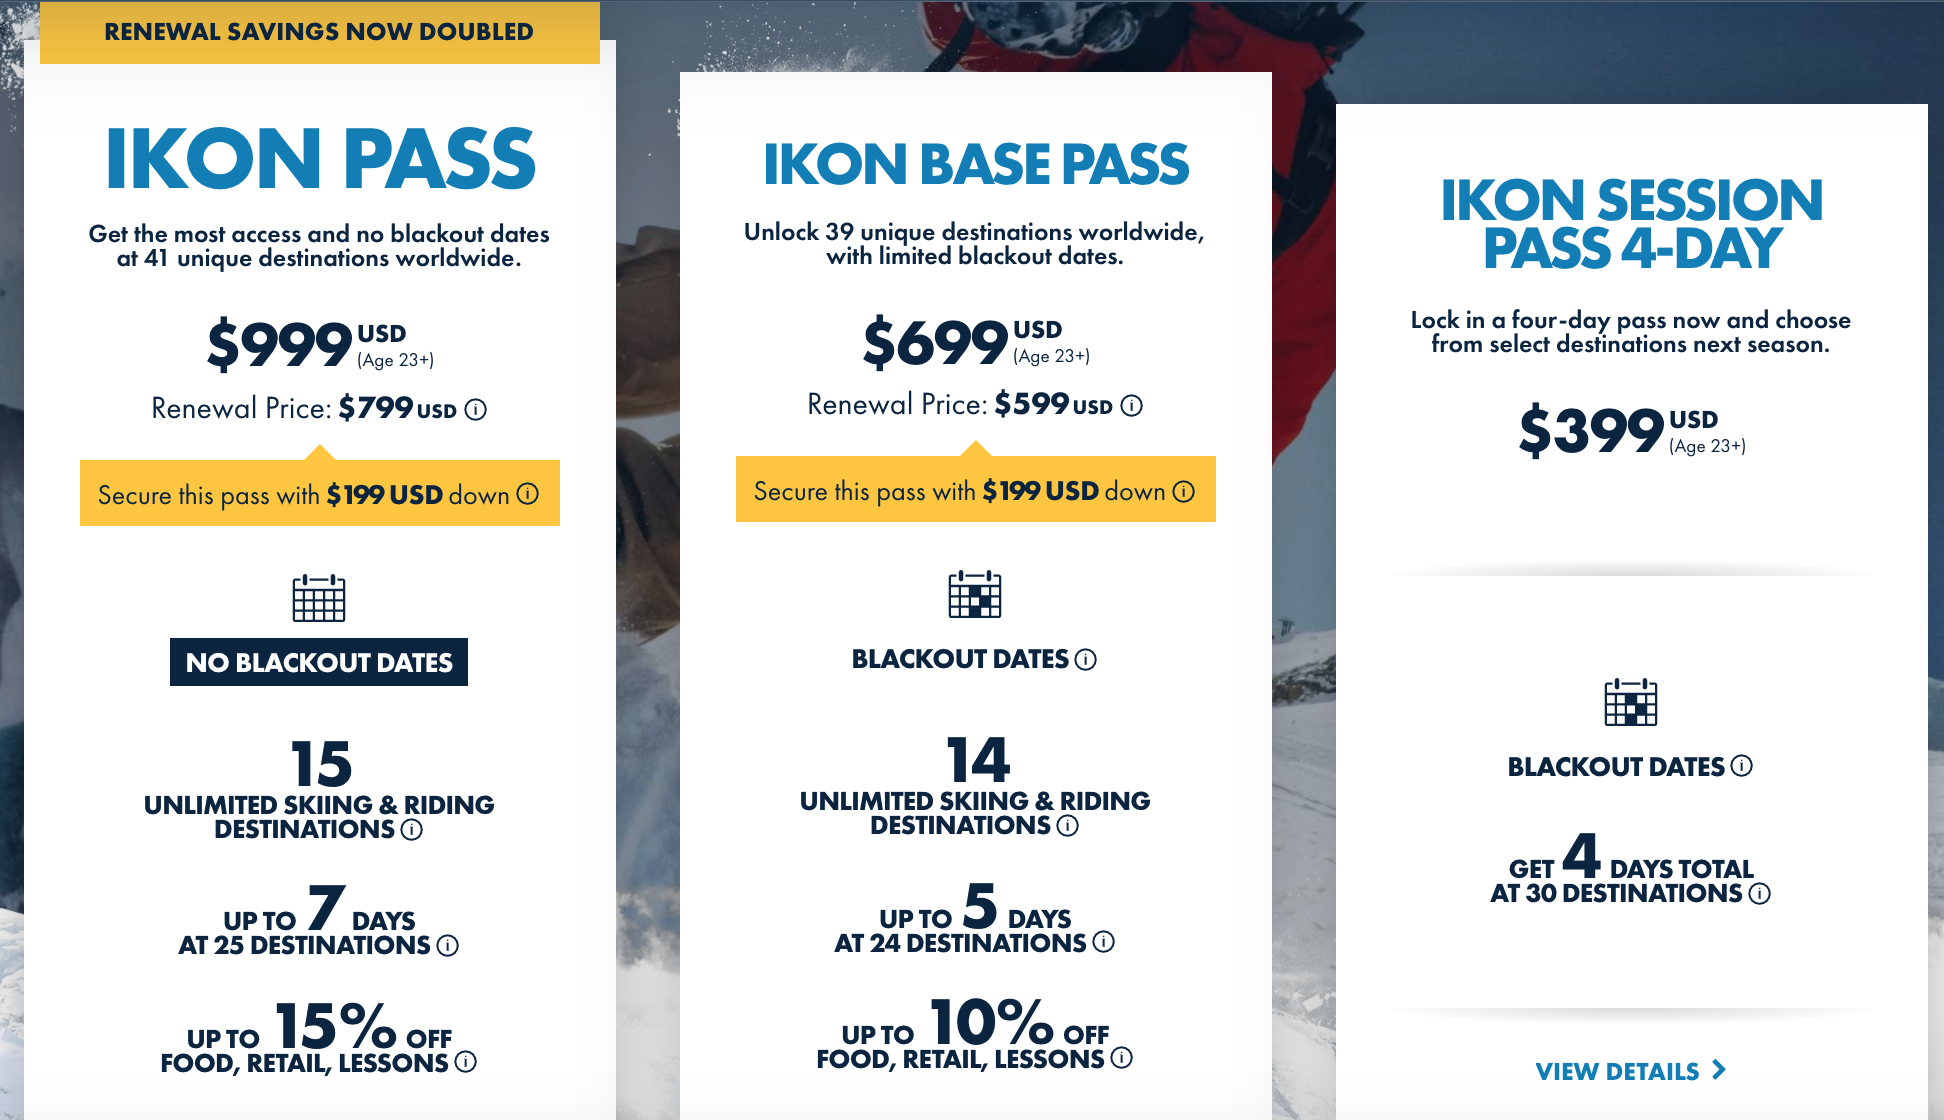 Ikon ski pass discounted even more for renewals and price increase